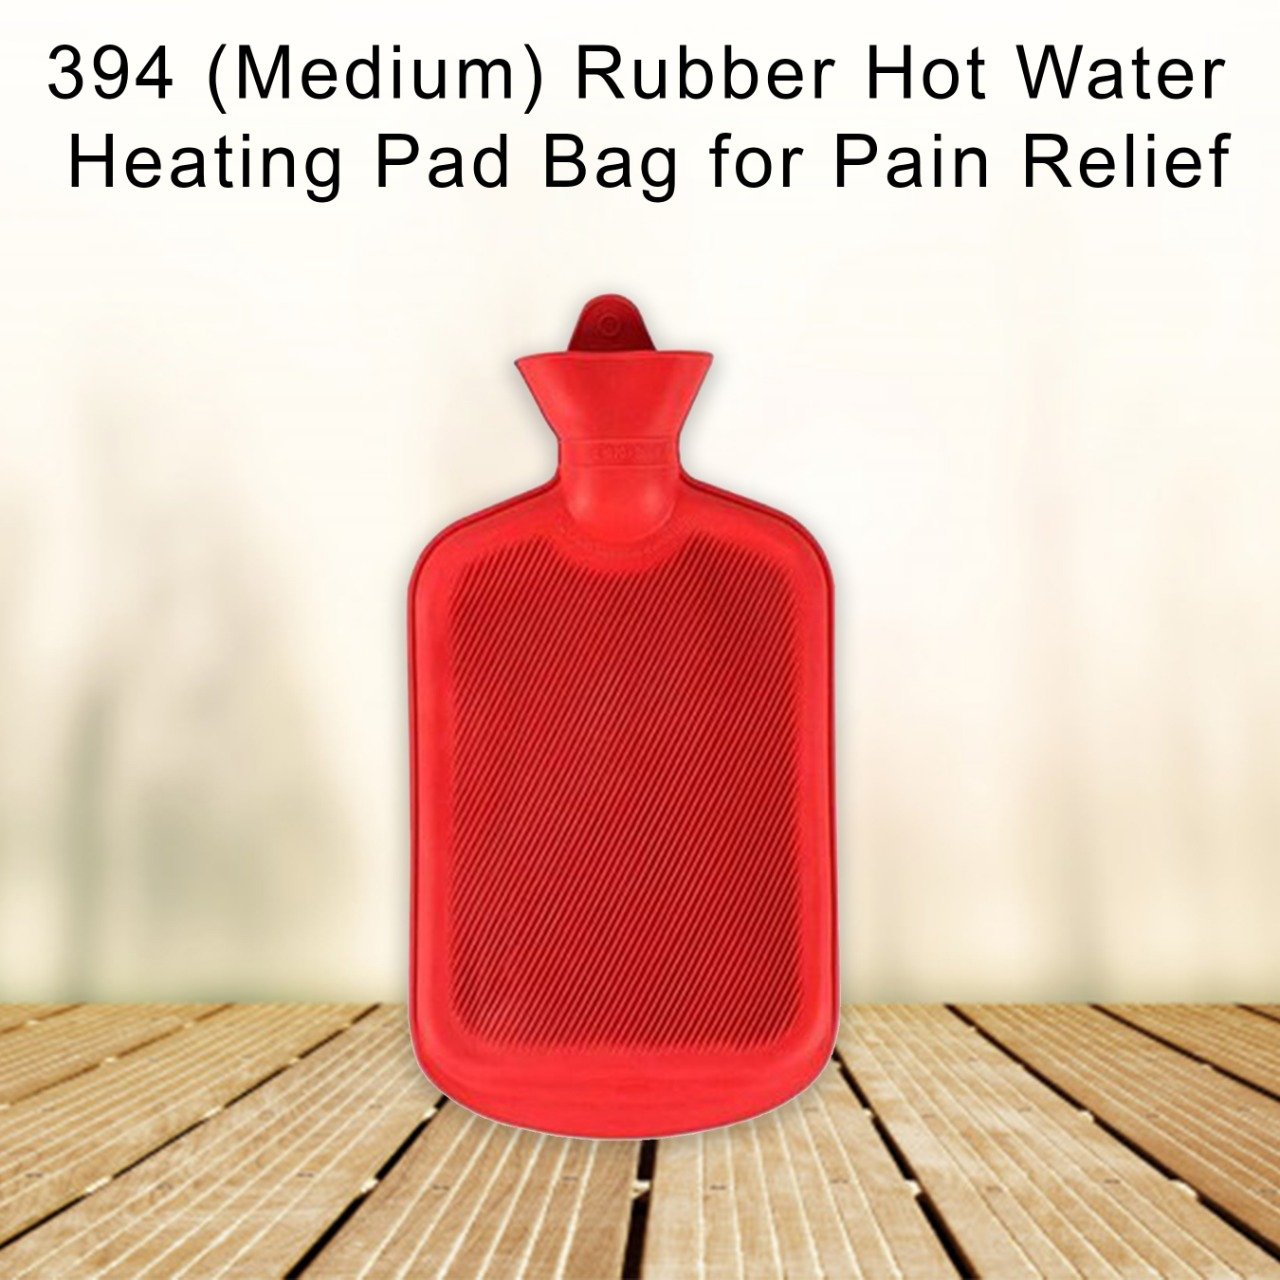 0394 (Medium) Rubber Hot Water Heating Pad Bag for Pain Relief (750 ML) - SkyShopy